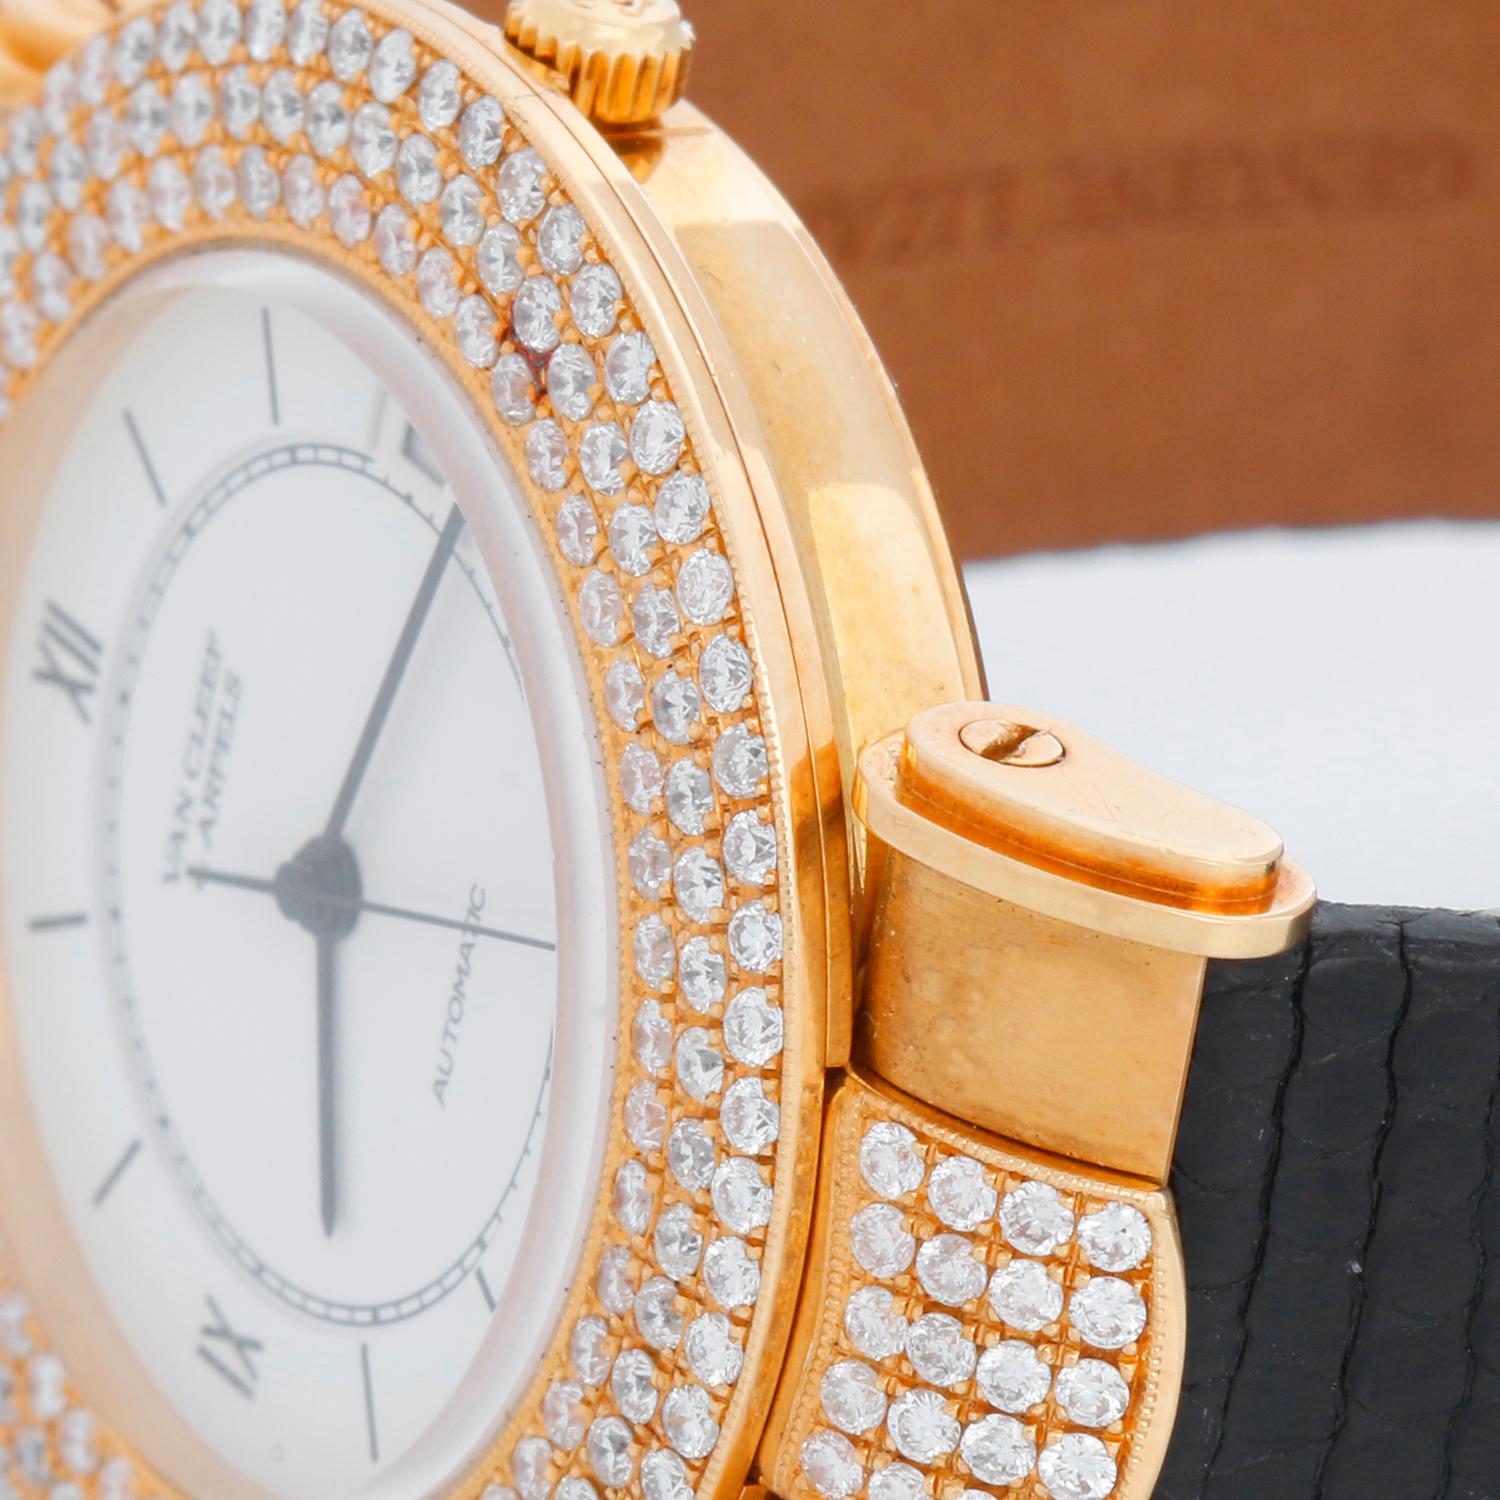 Van Cleef & Arpels Yellow Gold Classique Diamond Ladies Watch In Excellent Condition For Sale In Dallas, TX